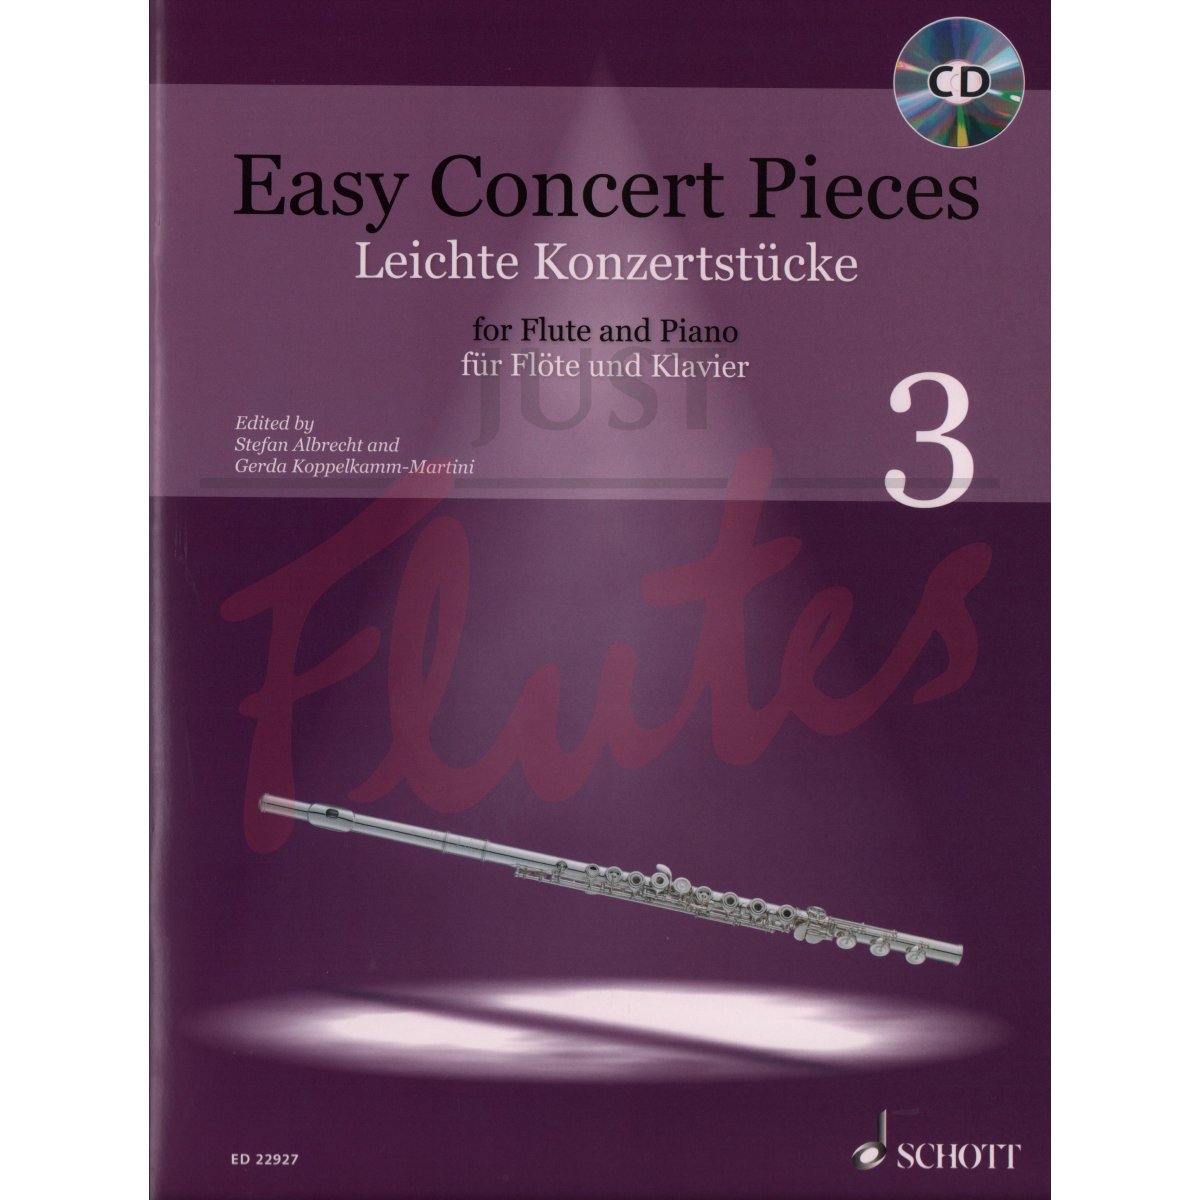 Easy Concert Pieces for Flute Vol.3